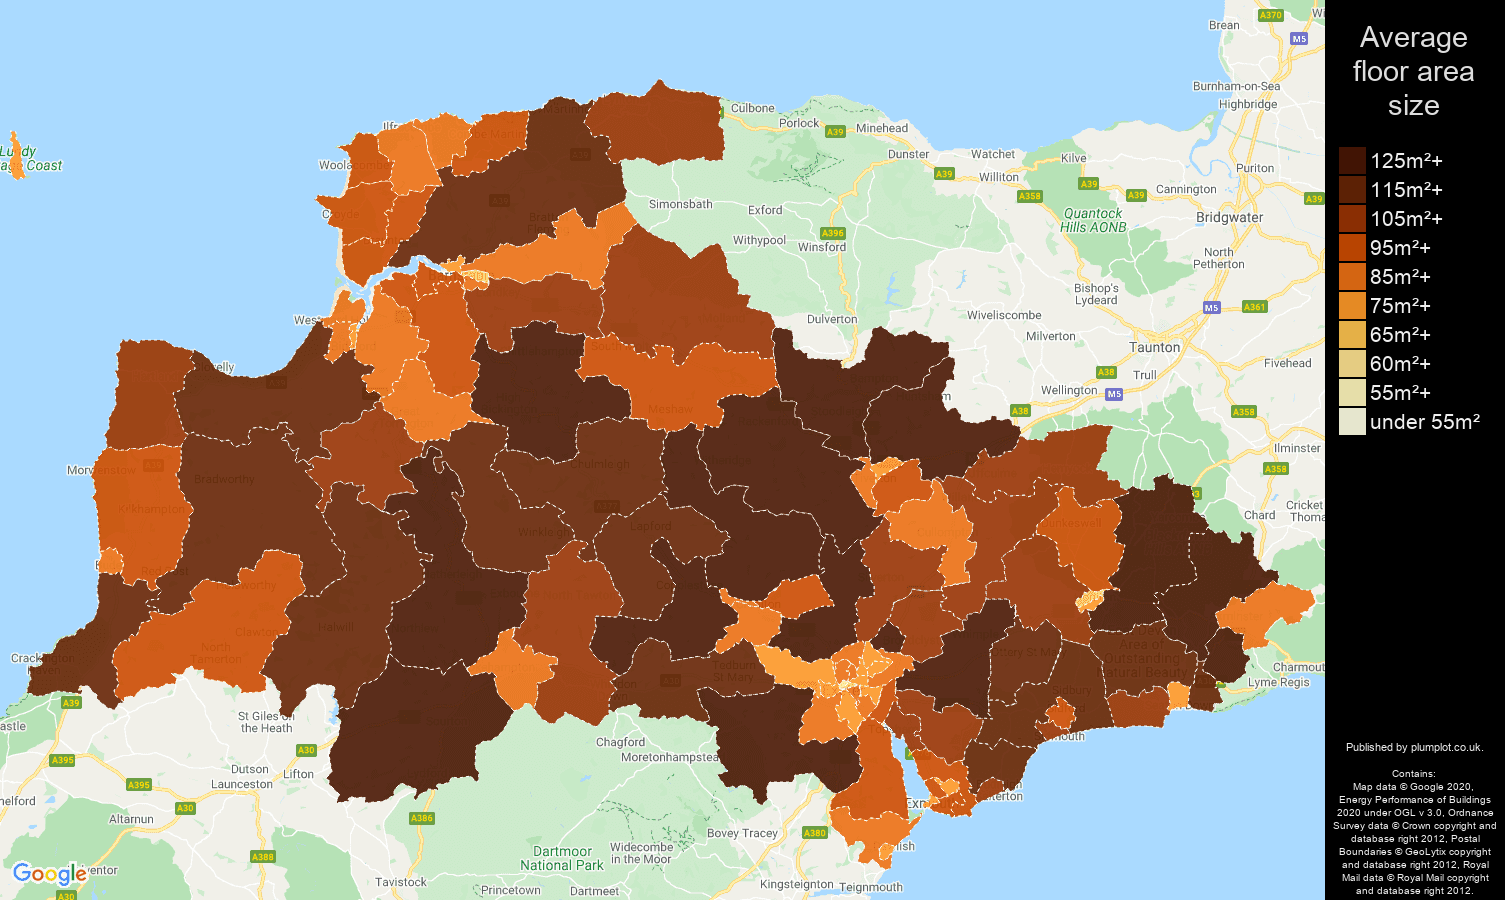 Exeter map of average floor area size of properties